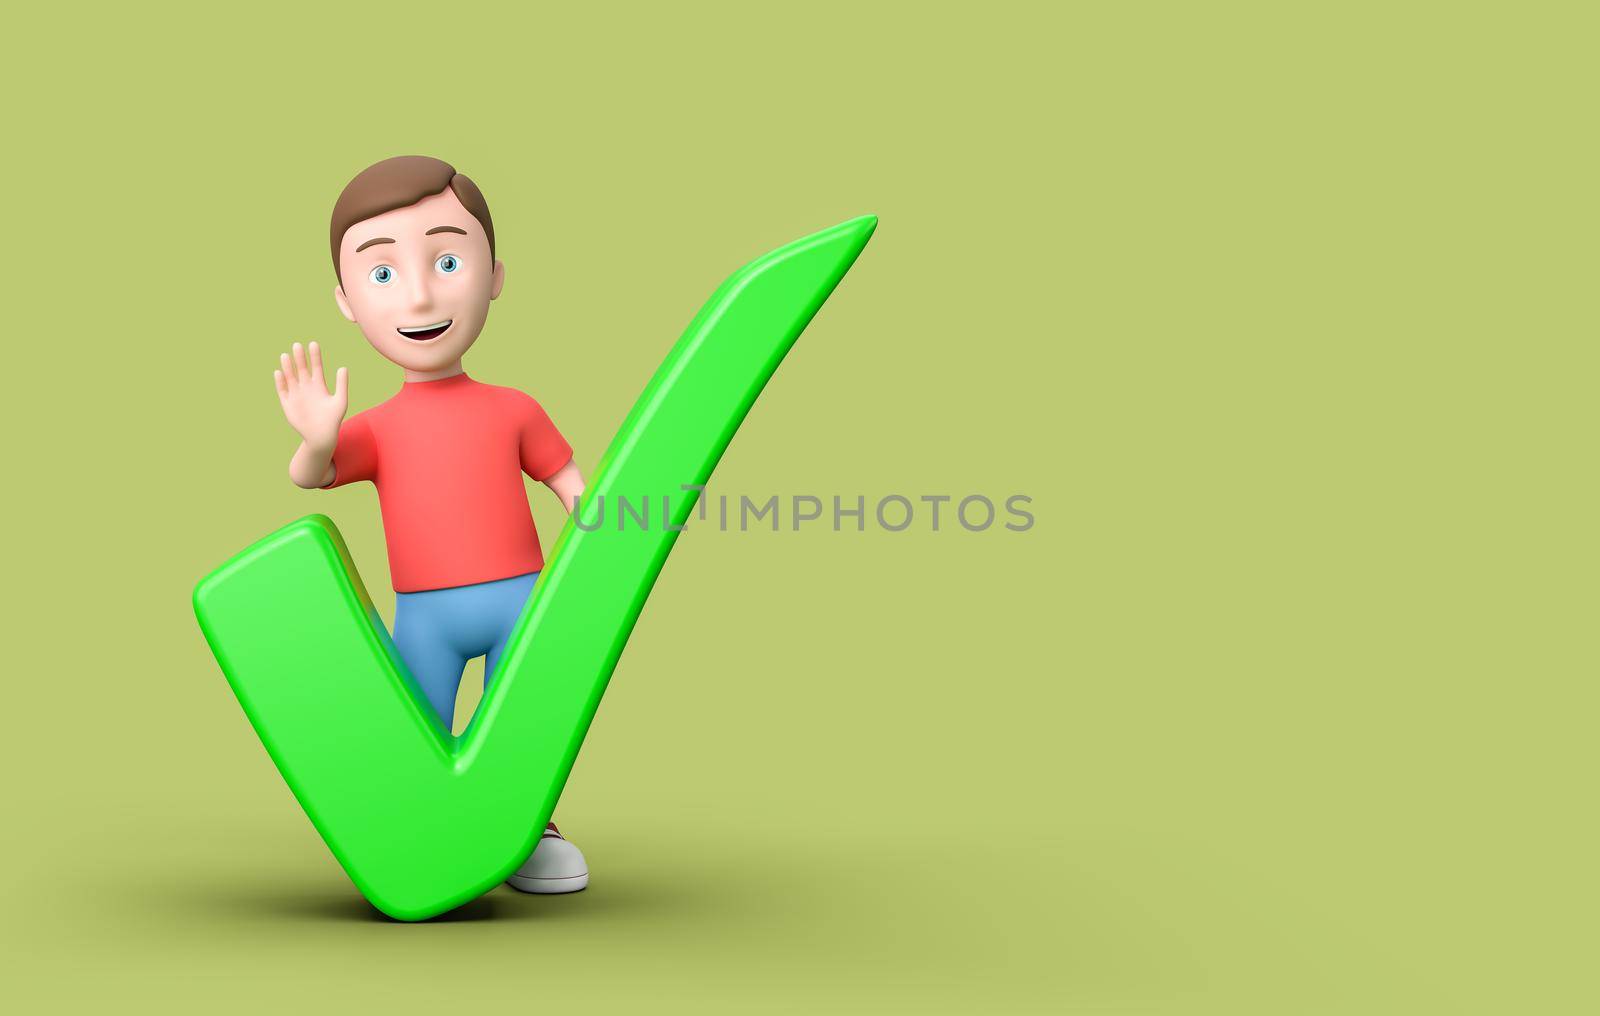 Happy Young Kid 3D Cartoon Character with Check Mark on Green Background with Copy Space 3D Illustration